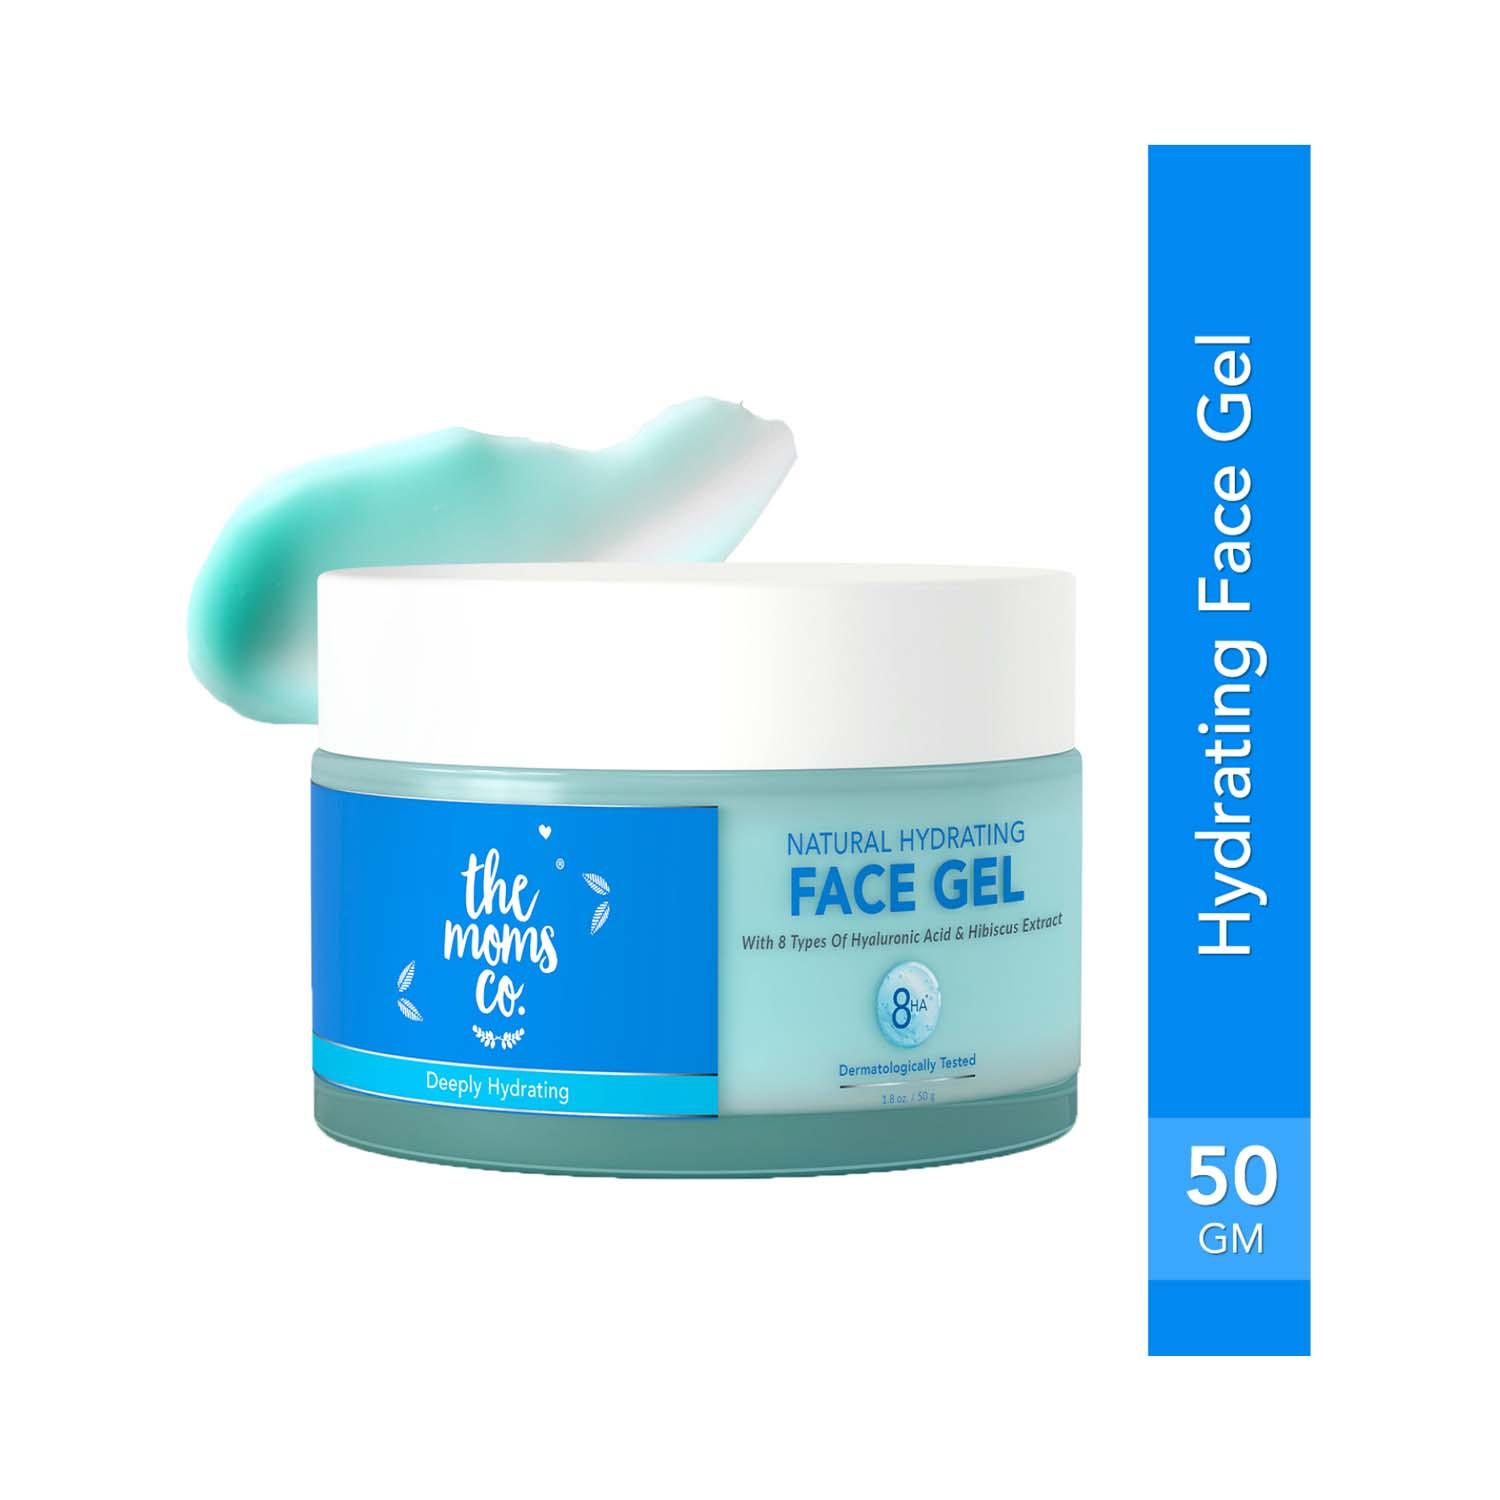 The Mom's Co. | The Mom's Co. Natural Hydrating Face Gel With 8 Types Of Hyaluronic Acid and Hibiscus Extracts (50g)